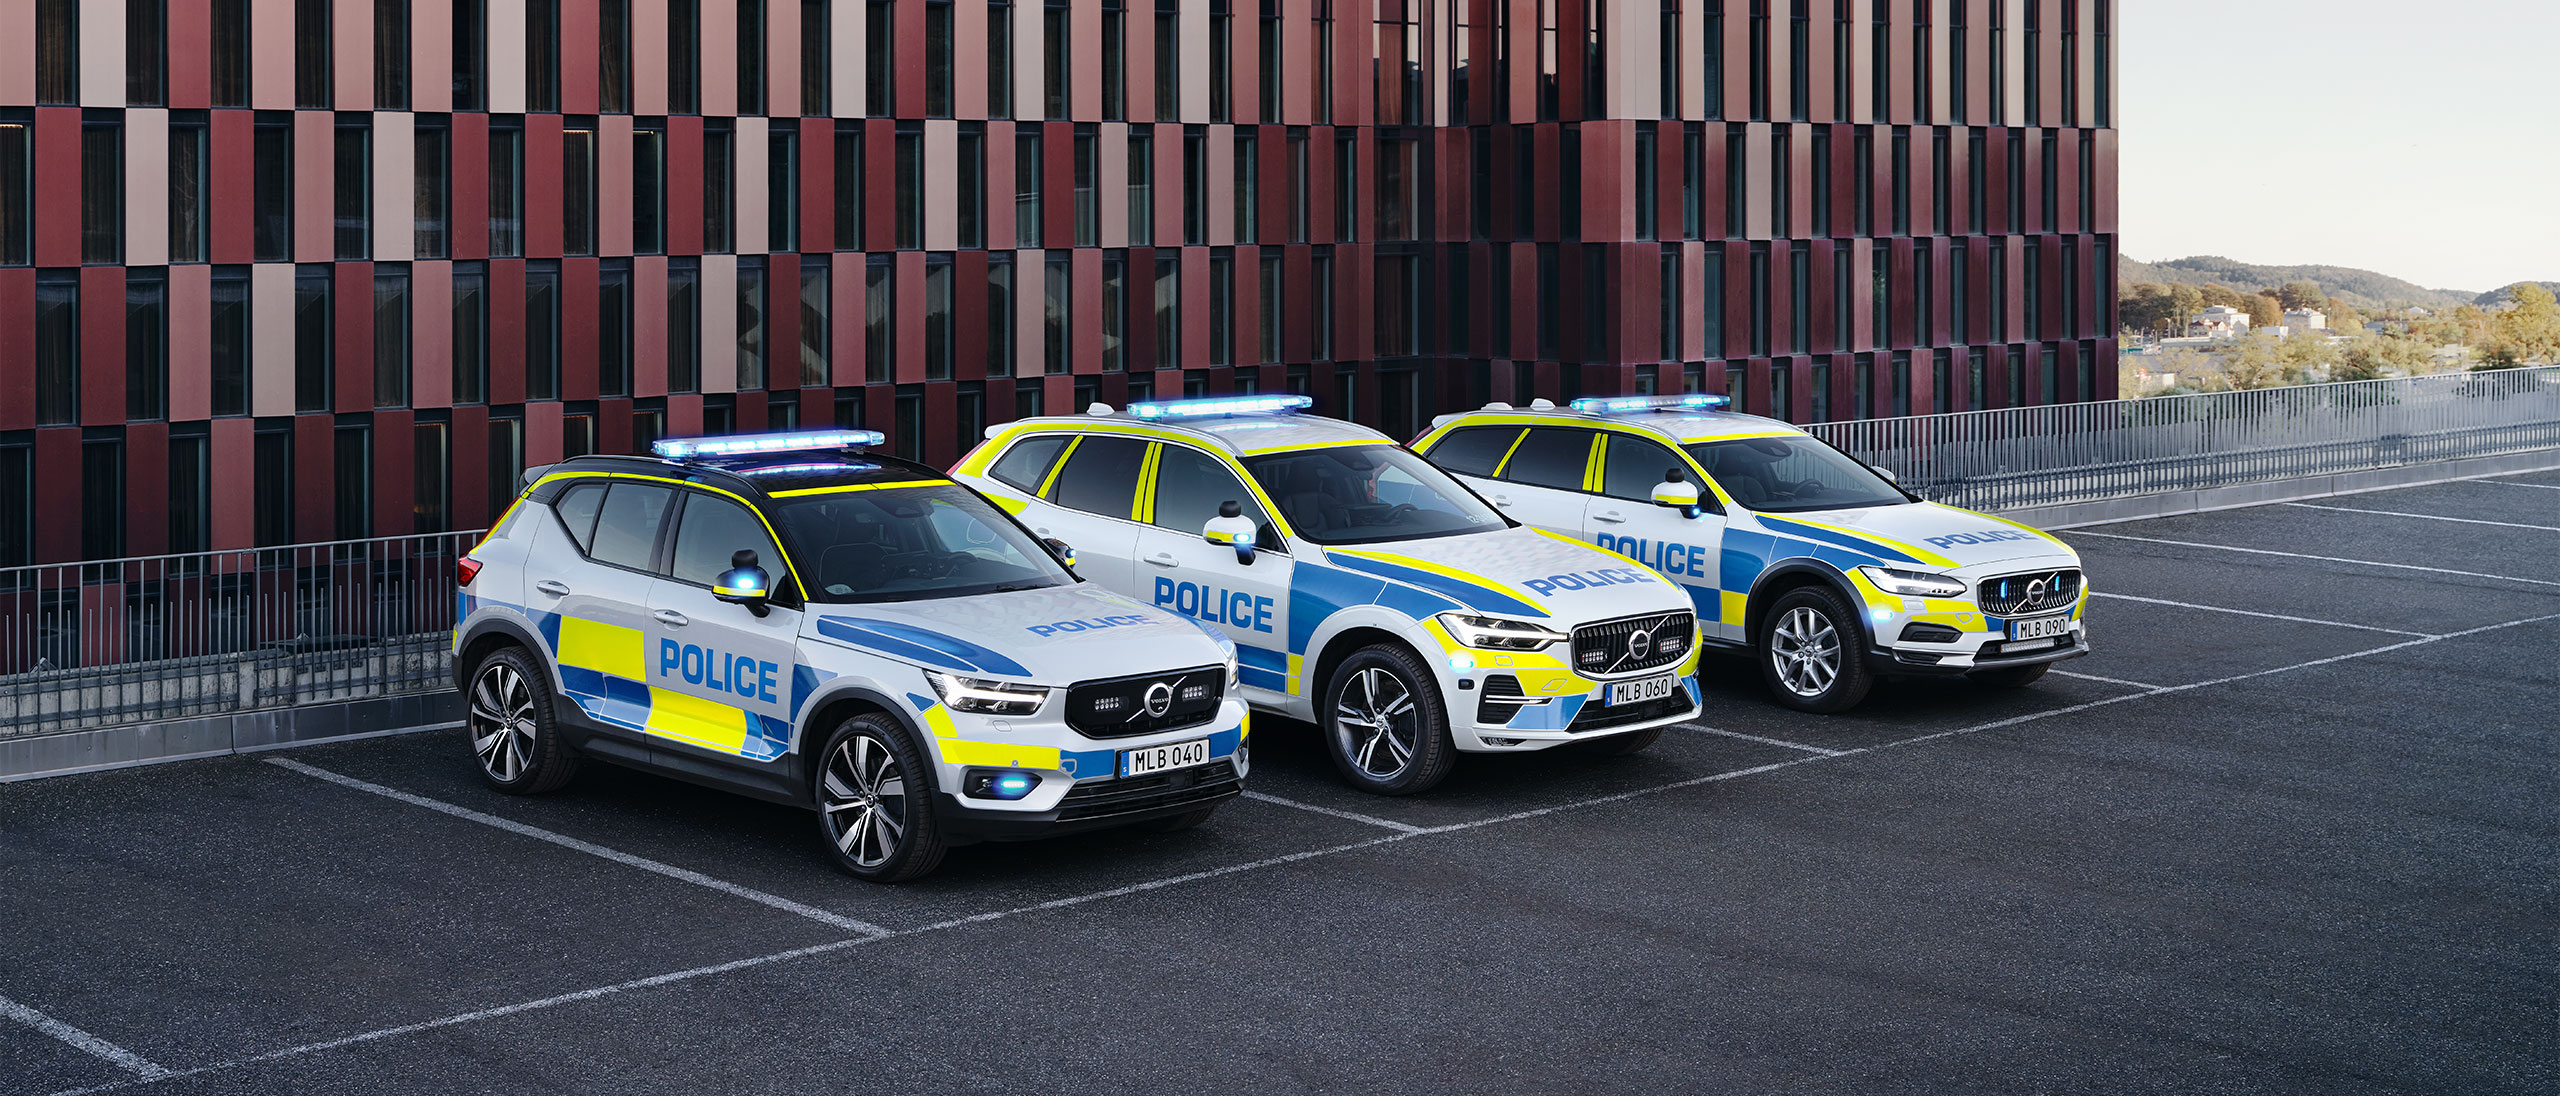 The Volvo XC40 full-electric, XC60 and V90 Cross Country police cars parked outside an official building.